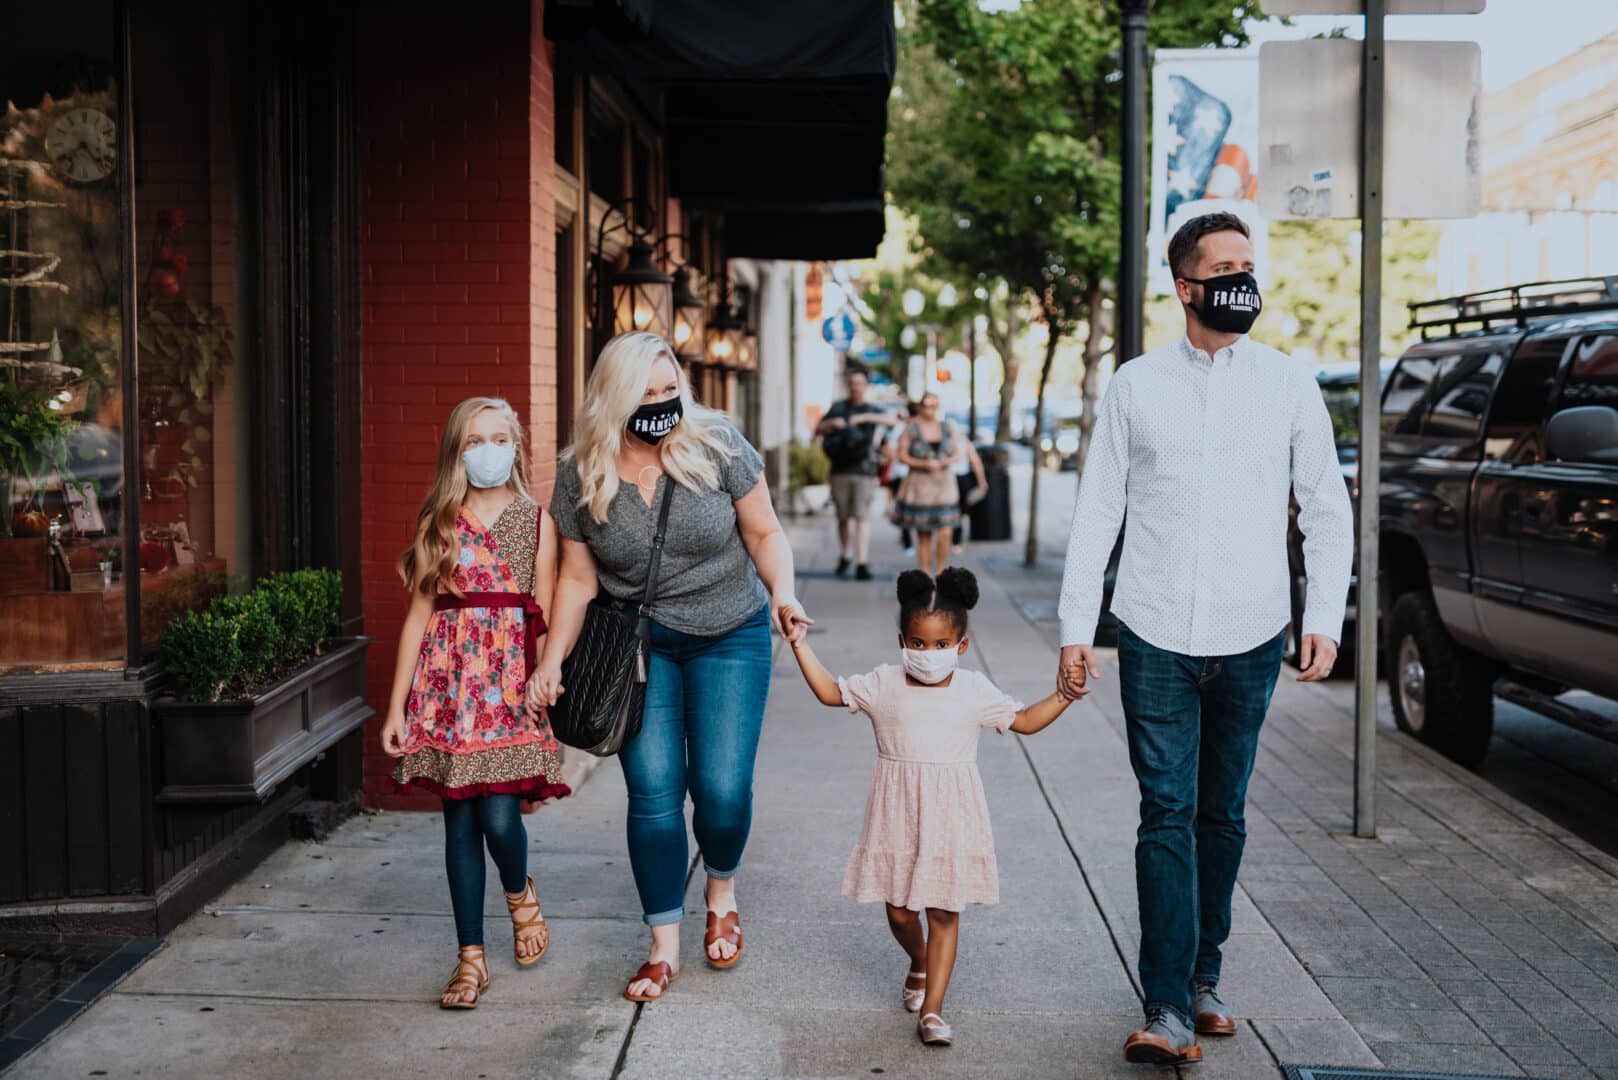 Family shopping in downtown Franklin, Tennessee, find restaurants with great food, shop the stores, antiques and more in historic downtown Franklin.